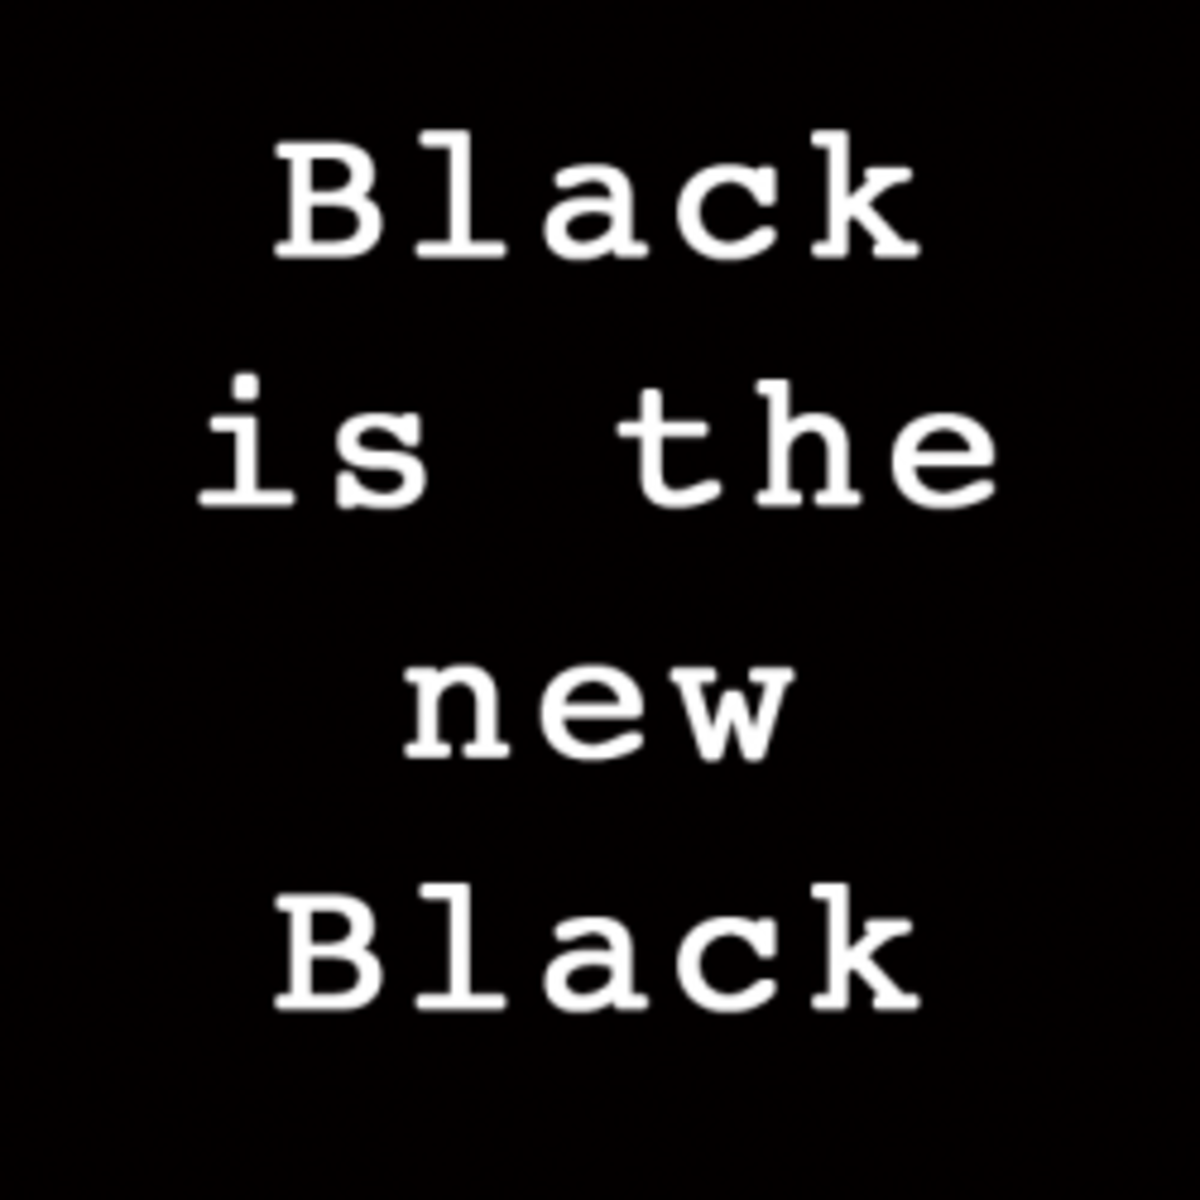 Black is the new black